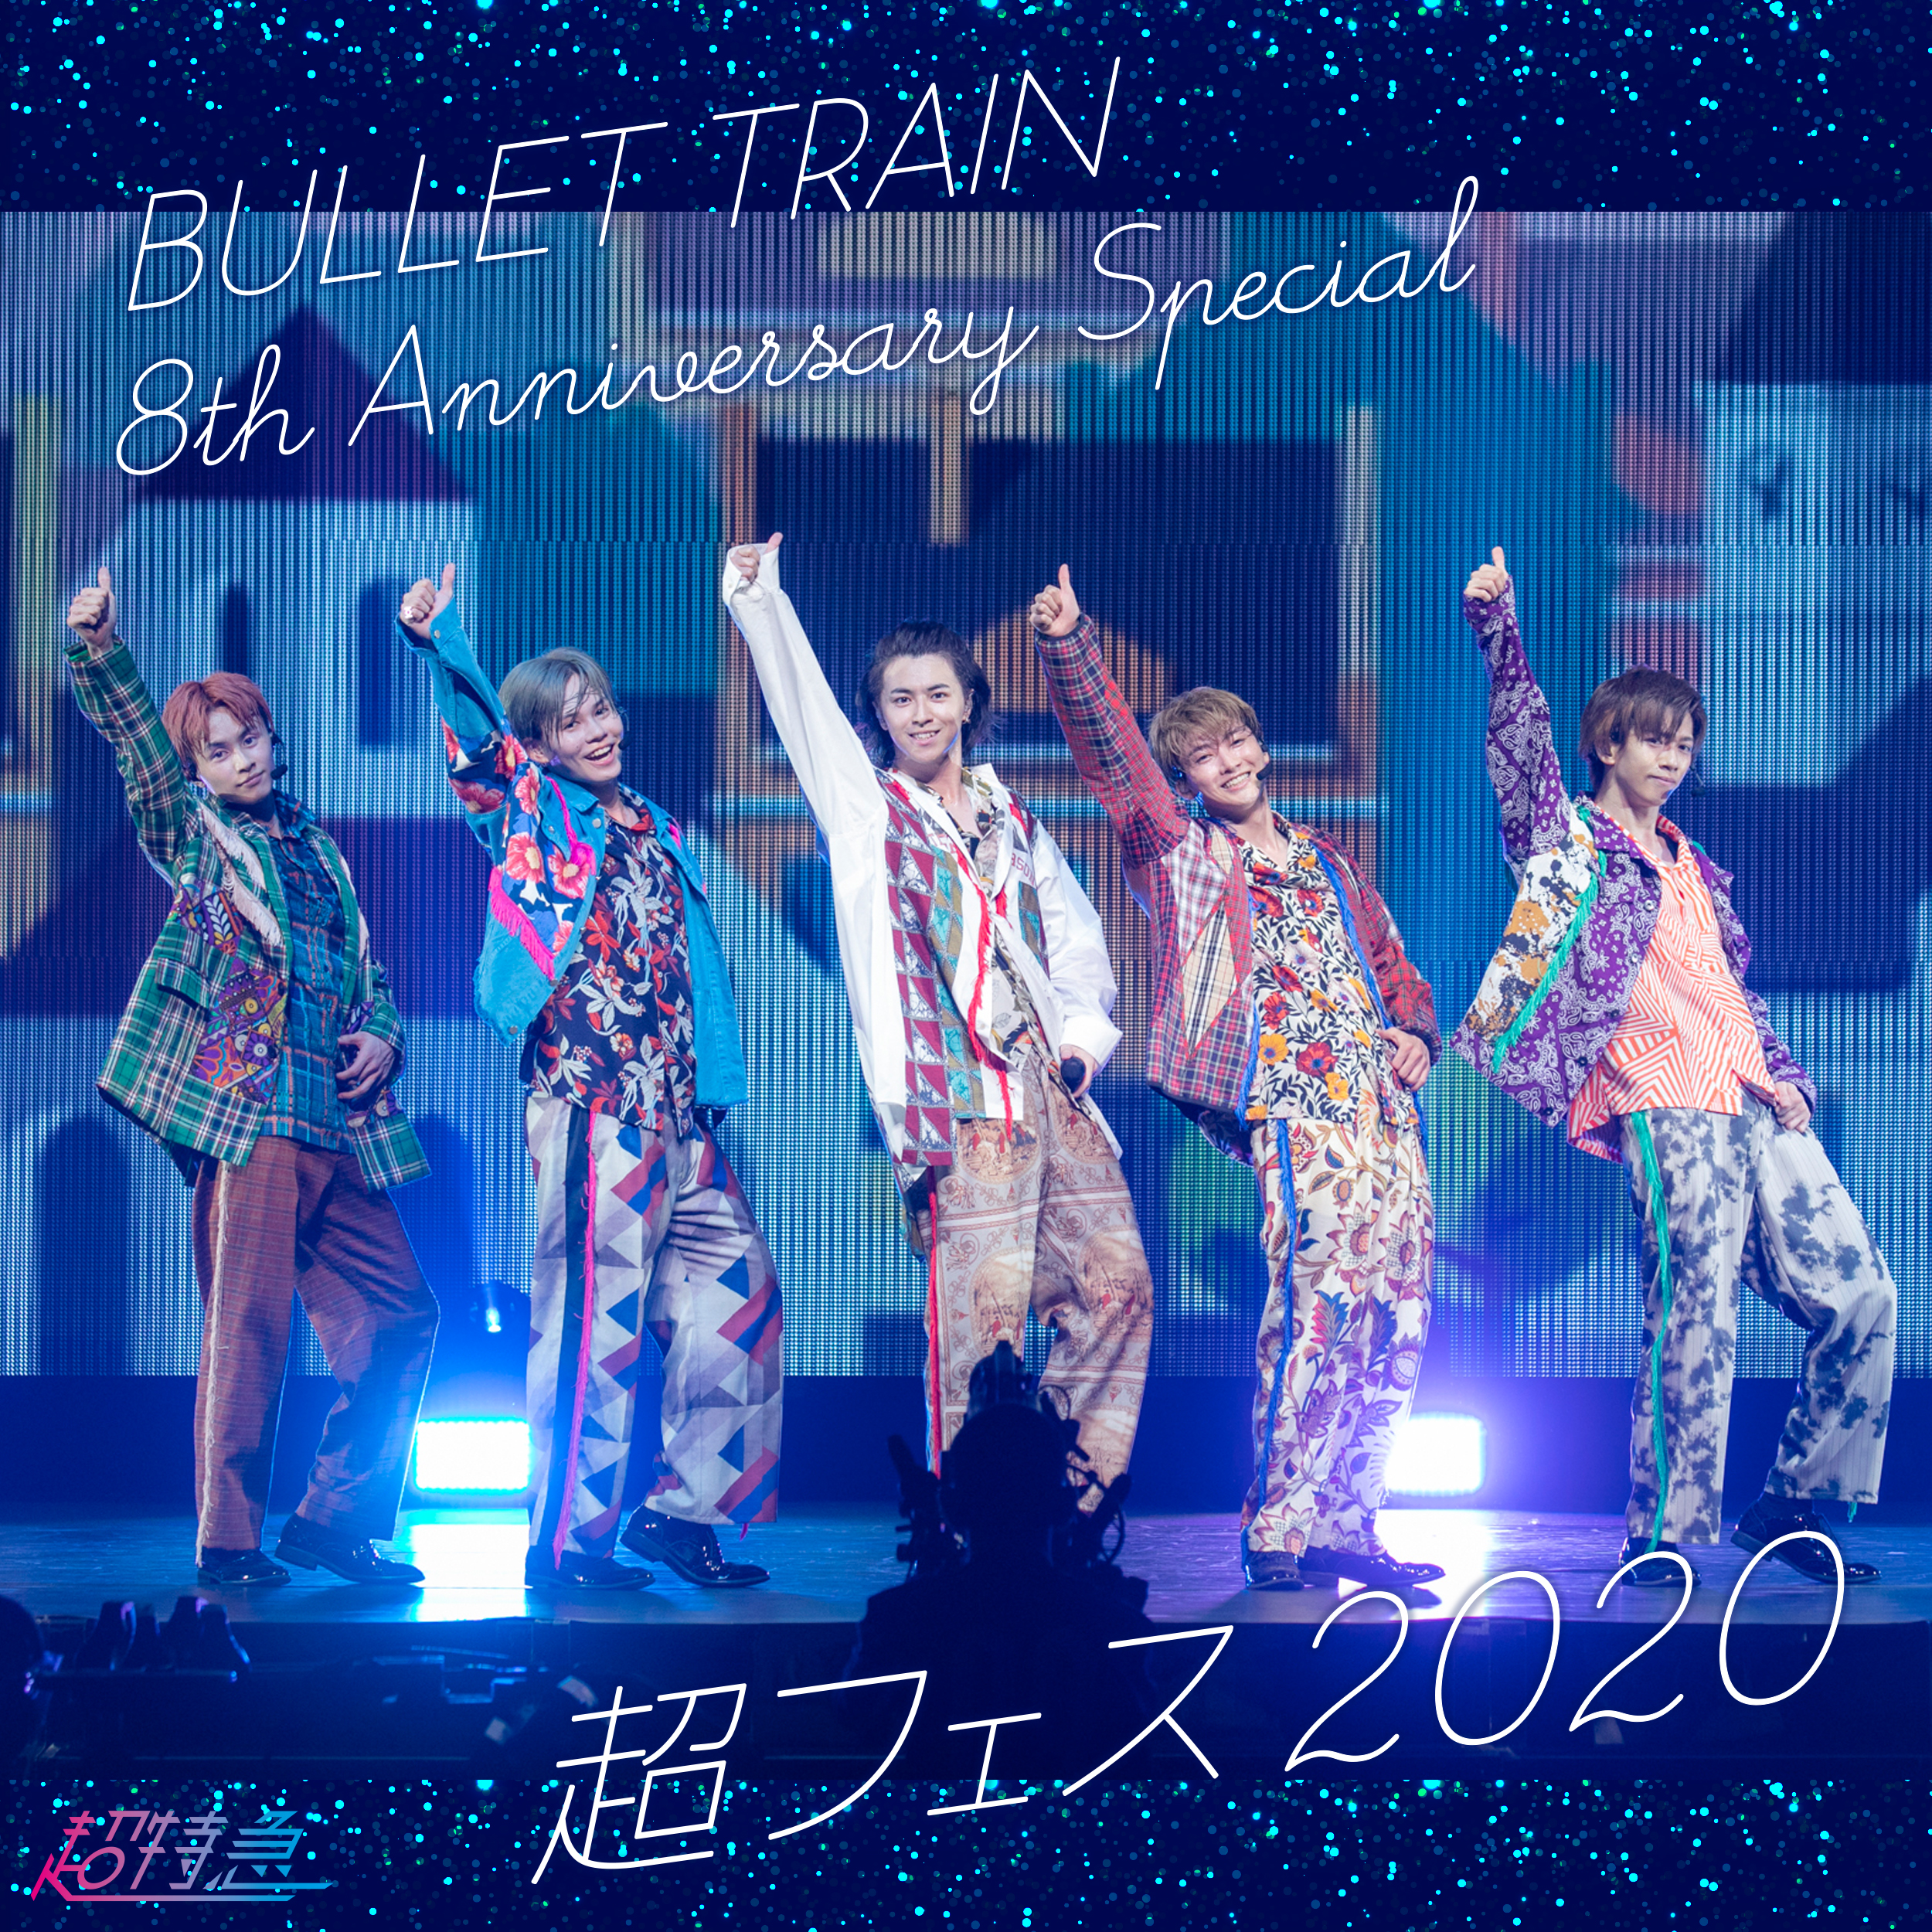 BULLET TRAIN 8th Anniversary Special 超フェス 2020」ライブ音源配信 